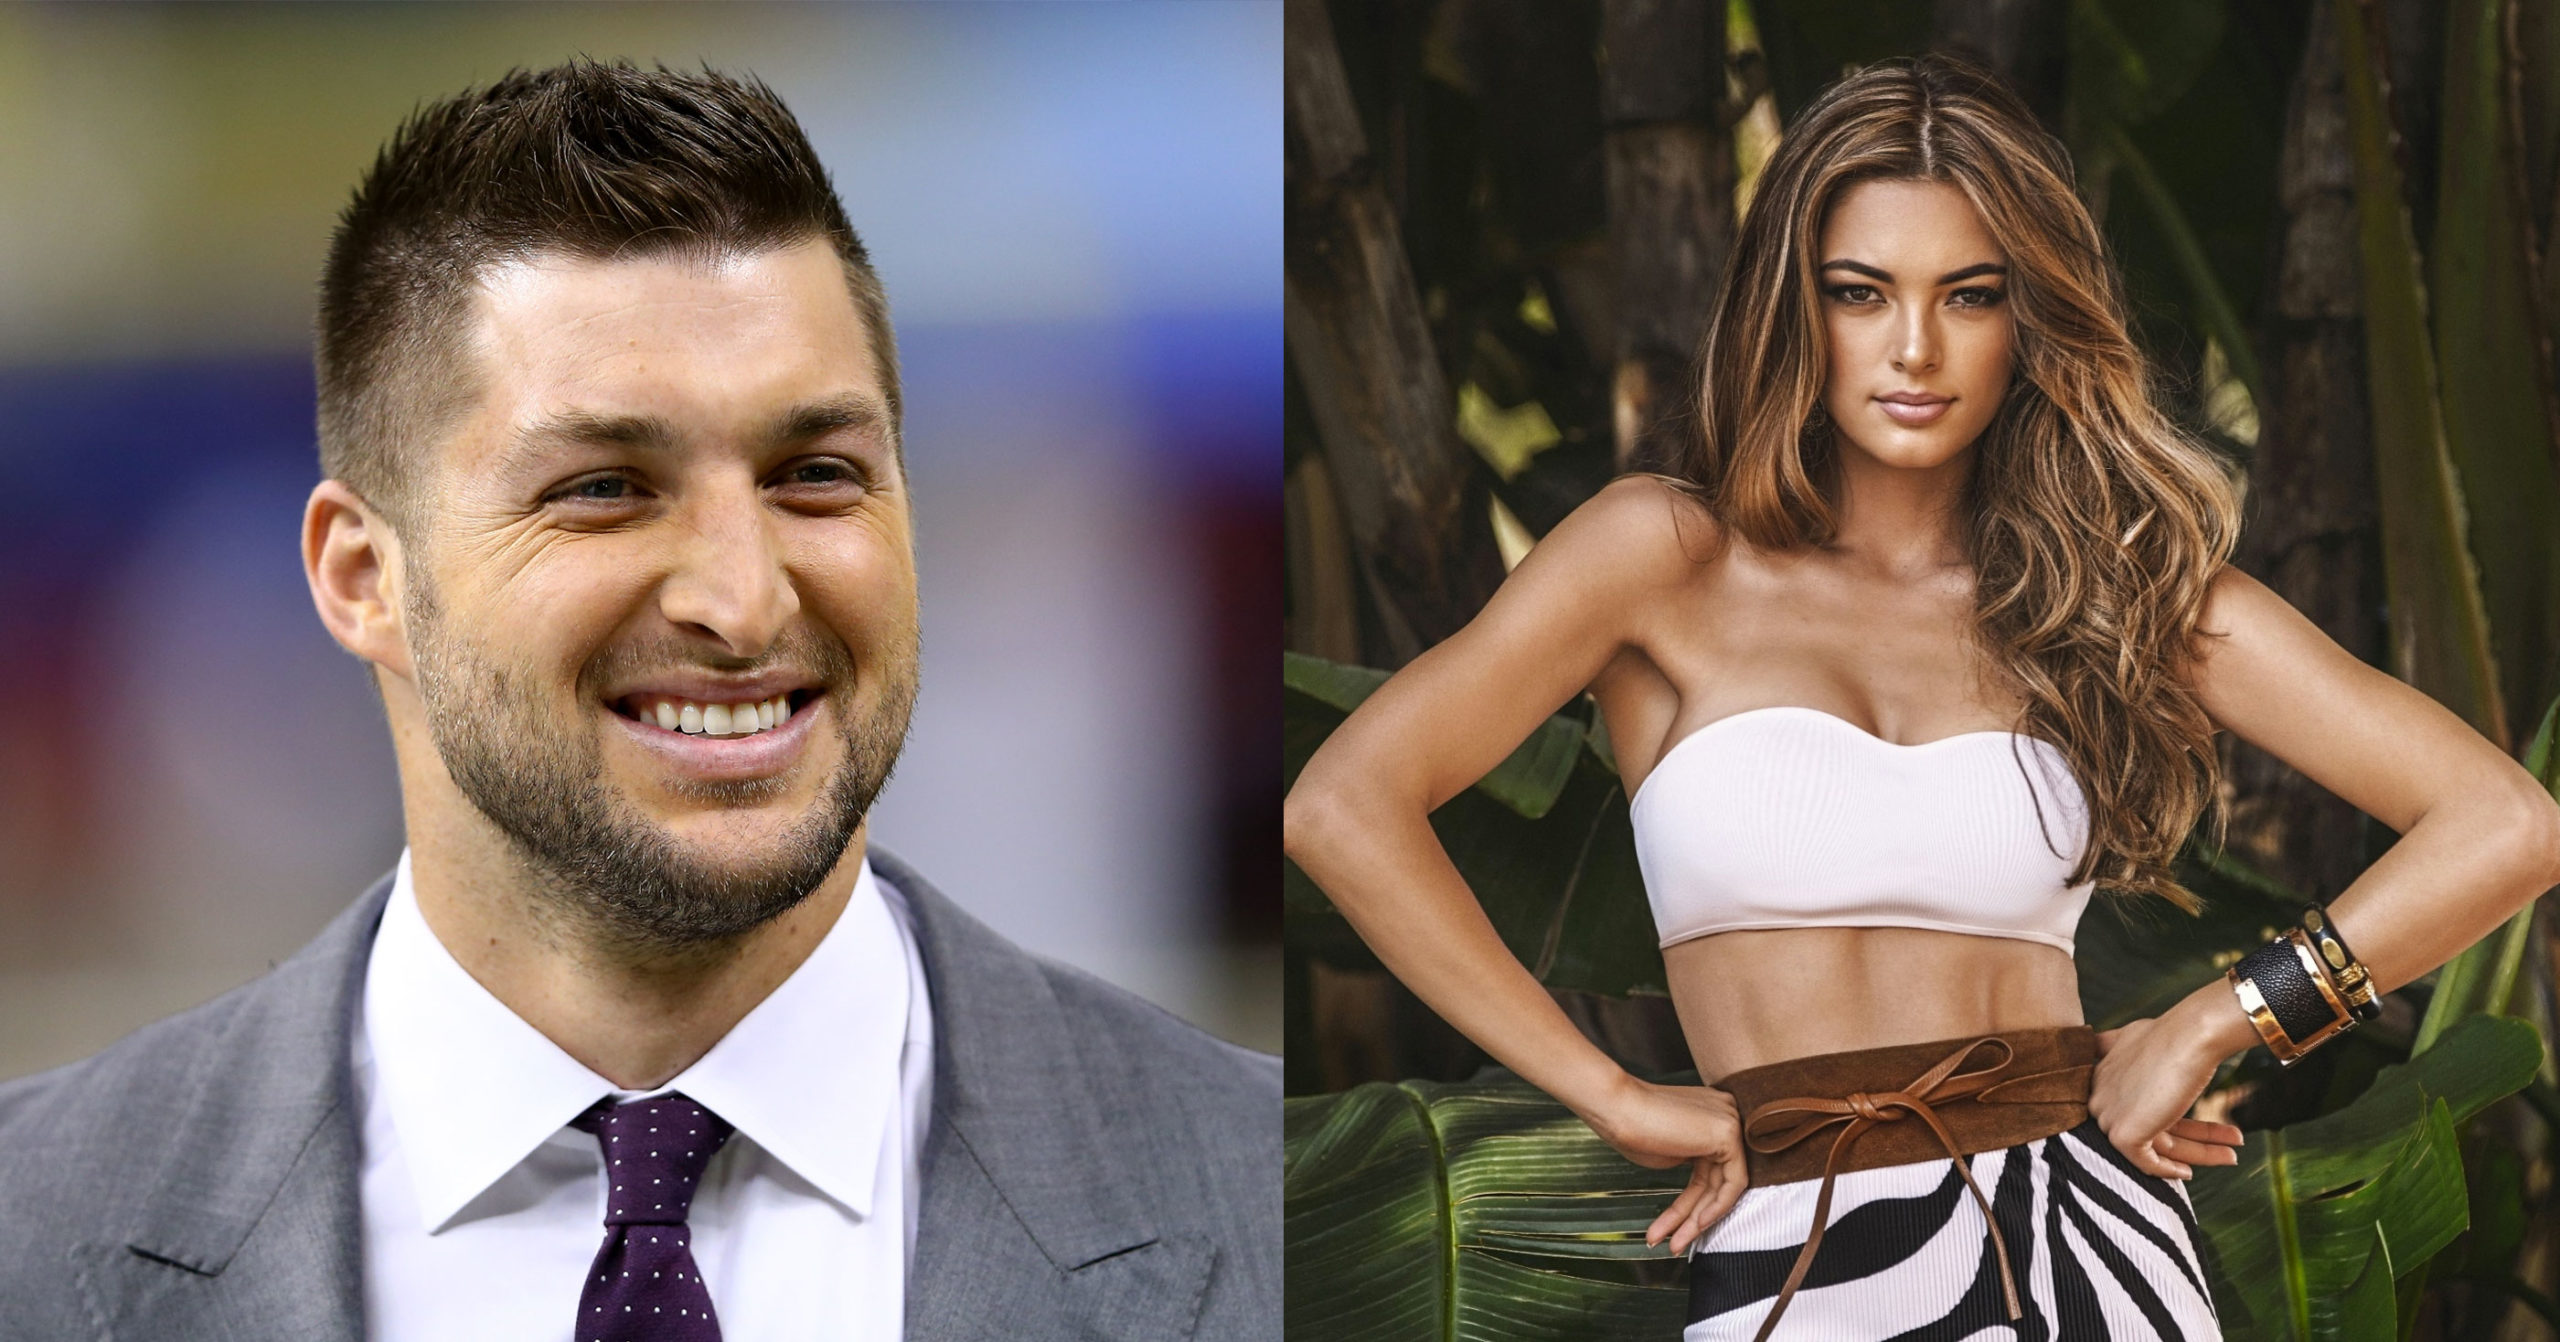 Tim Tebow Gets Engaged To Miss Universe Demi-Leigh Nel-Peters (PICS) picture